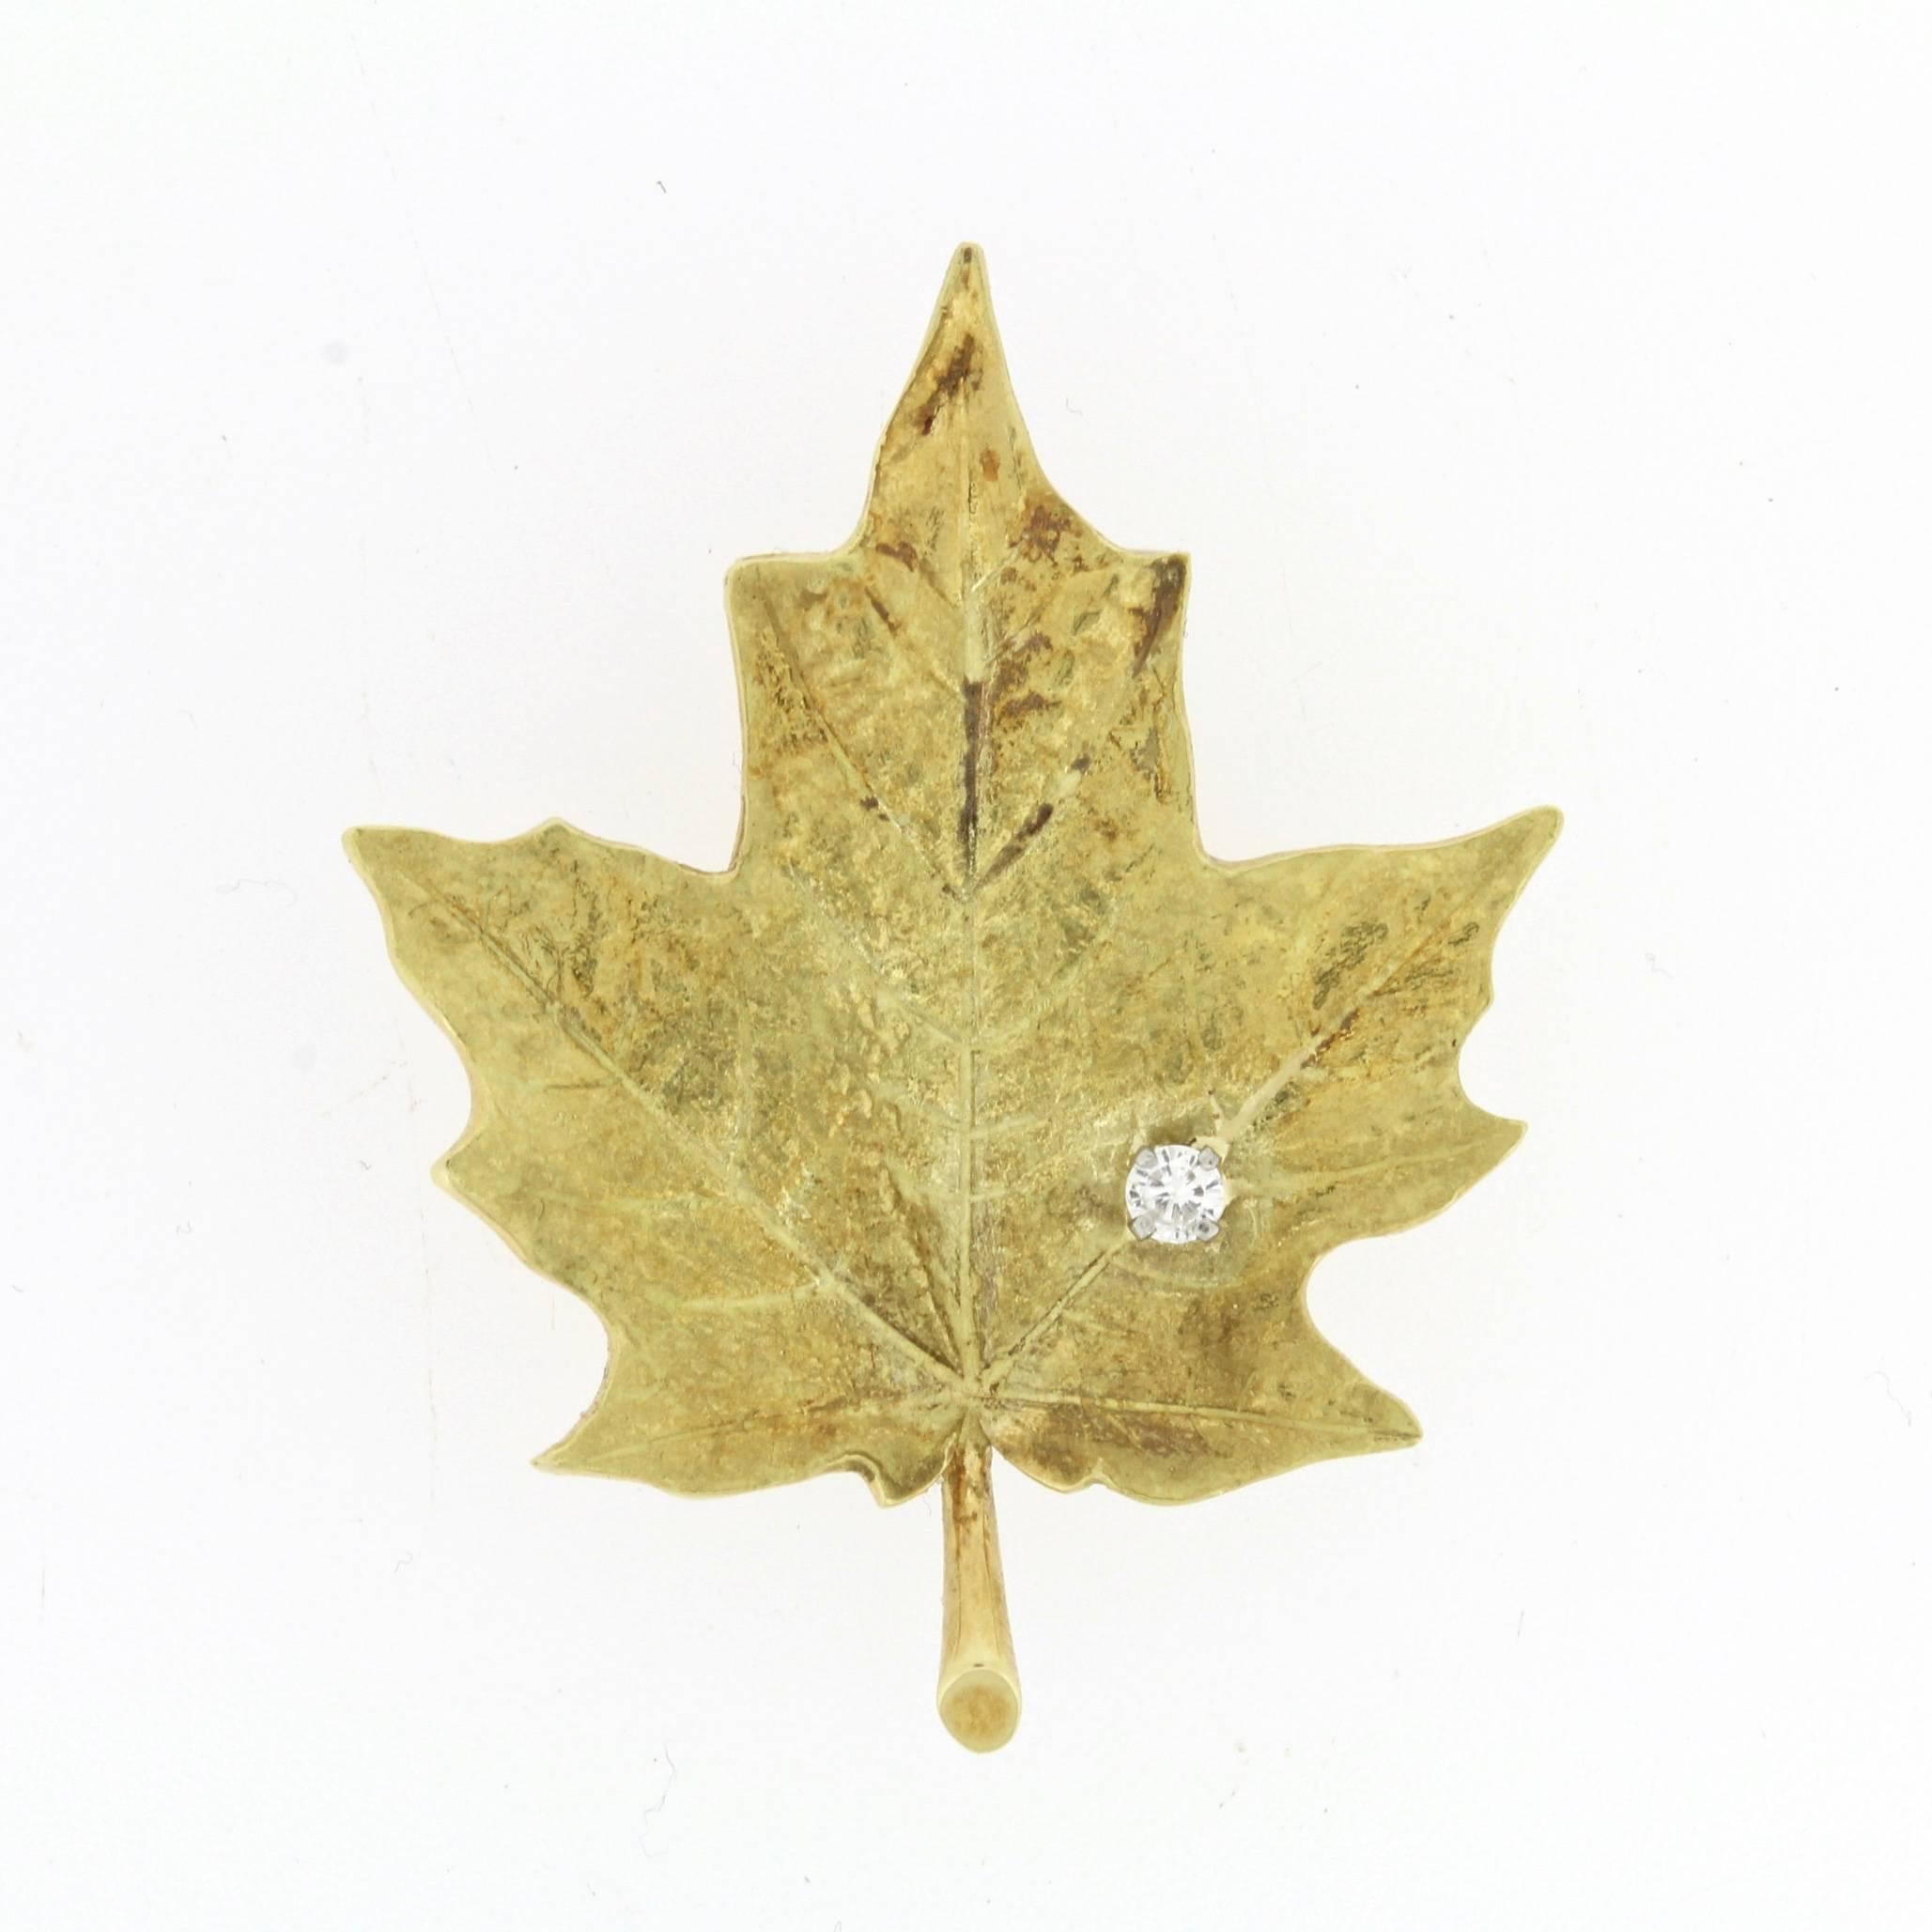 A very fine 18-karat yellow gold and diamond pin or brooch.  

Designed and produced by McTeigue in the early to mid-20th century.  

Of crisp maple leaf form with a veined, burnished surface set with a small high-quality accent diamond. 

The